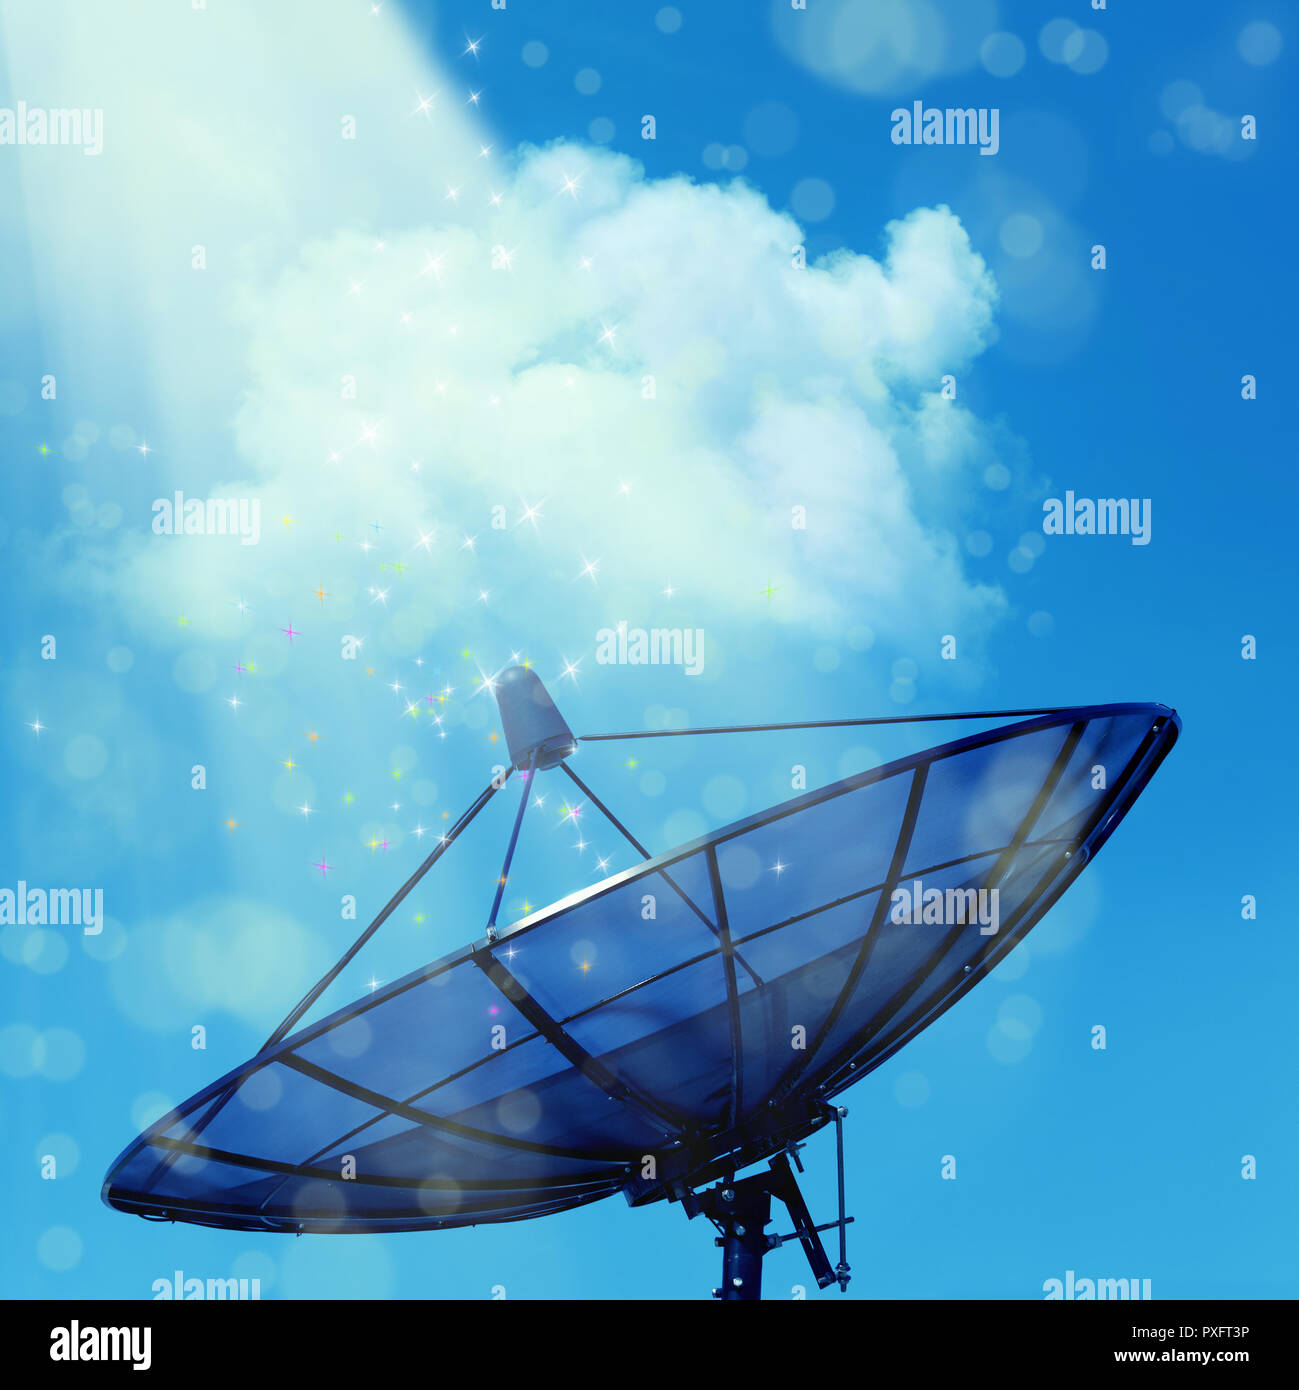 Conceptual image of a satellite dish antenna over night sky with abstract light manipulation Stock Photo